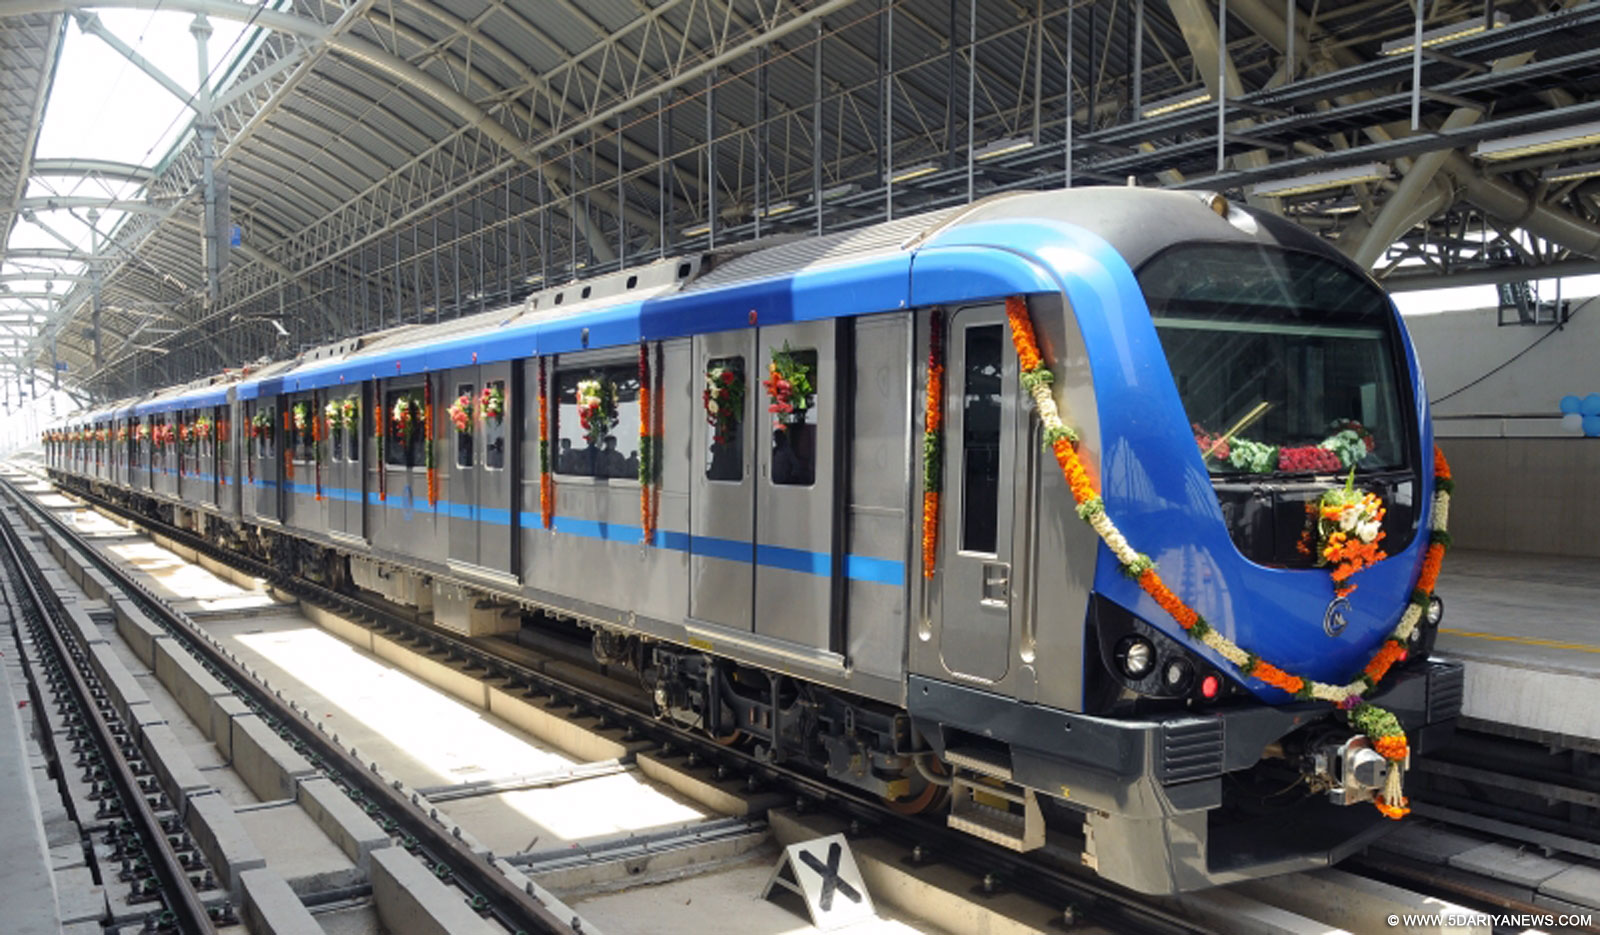 The picture shows a newly inaugurated metro rail coach plying through in Chennai, Tamil Nadu.